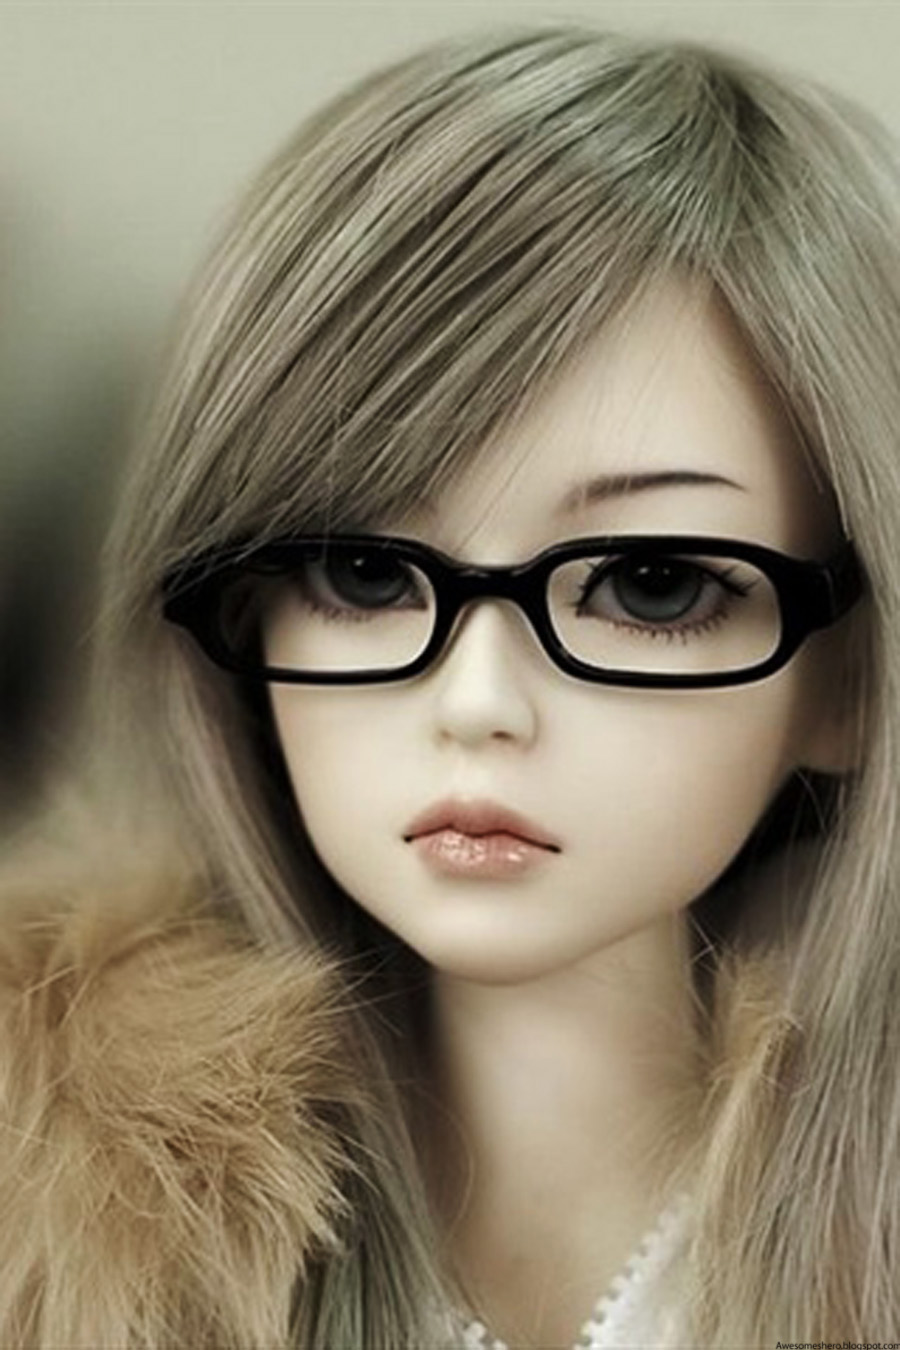 Beautiful Dolls Free Download Wallpapers Awesome wallpapers